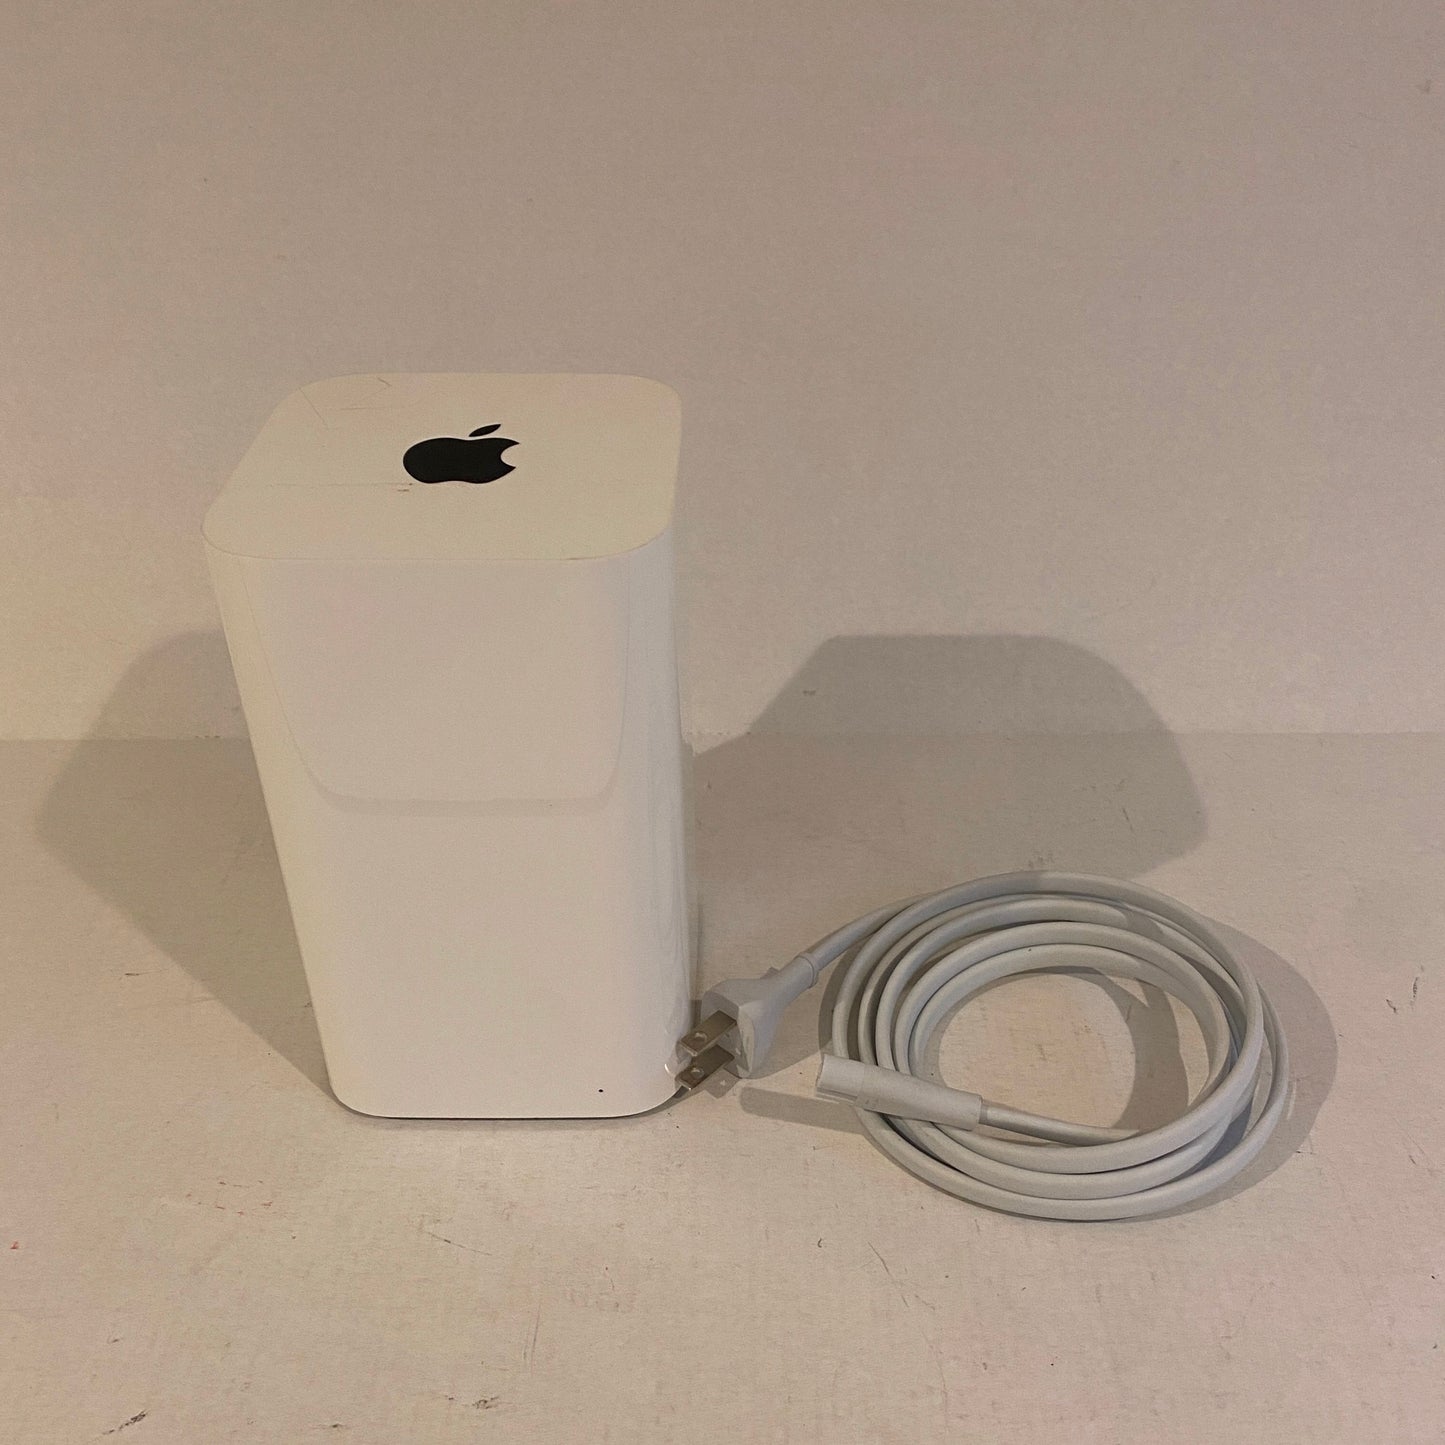 Apple AirPort Extreme 802.11ac Wireless Router 6th Gen - A1521